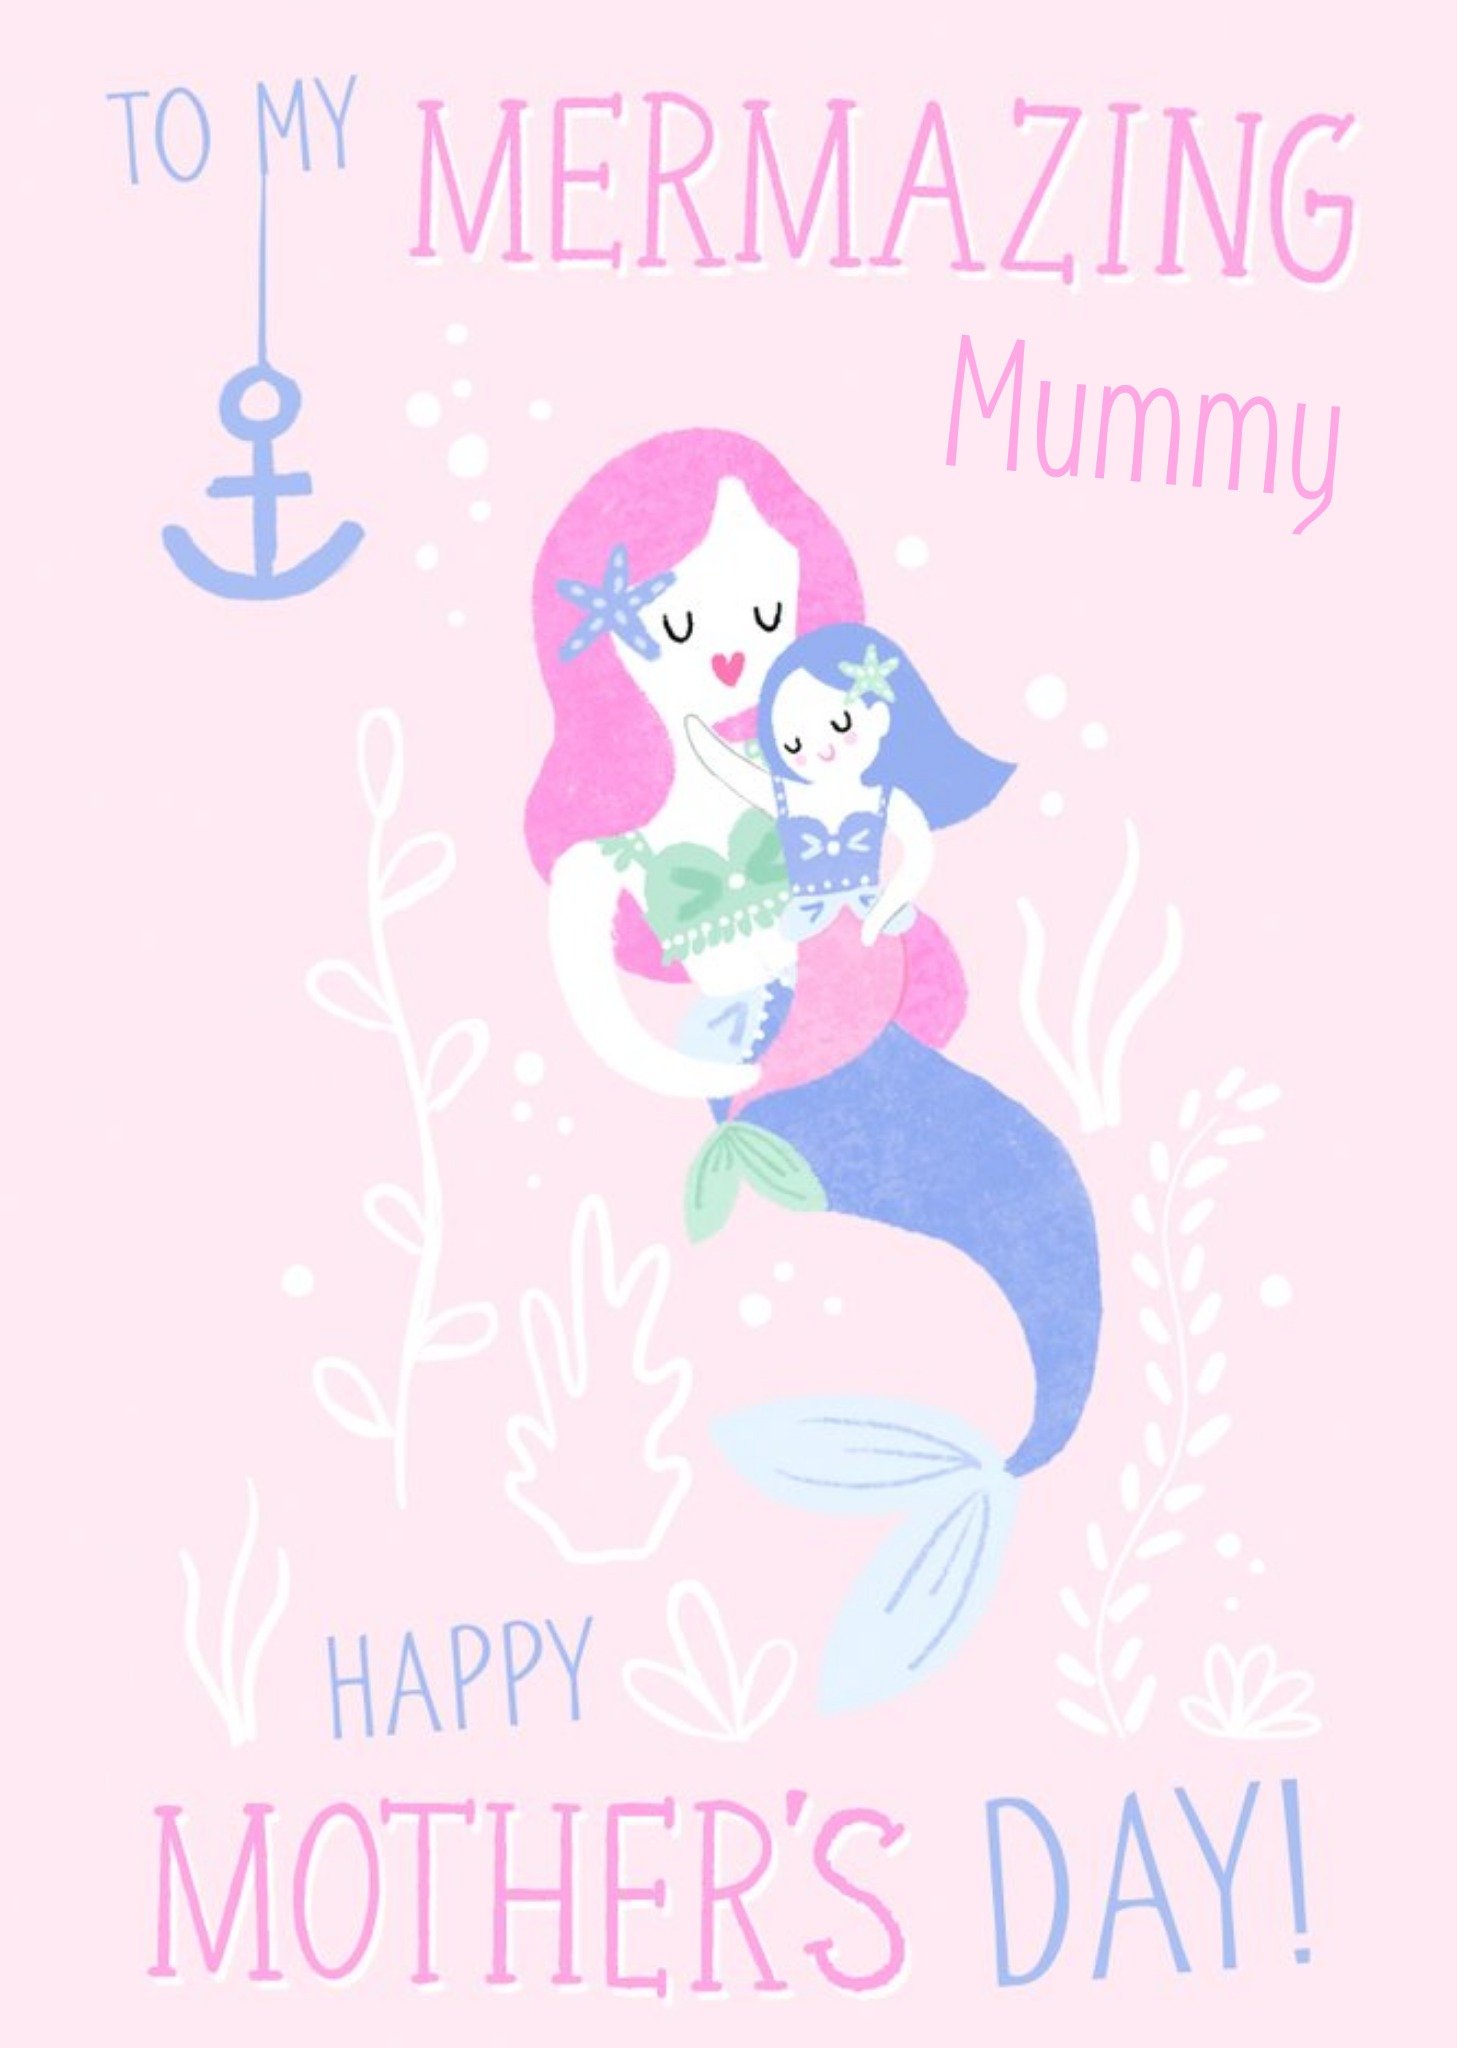 Moonpig Illustration Of A Mother And Daughter Mermaid Mermazing Mother's Day Card, Large